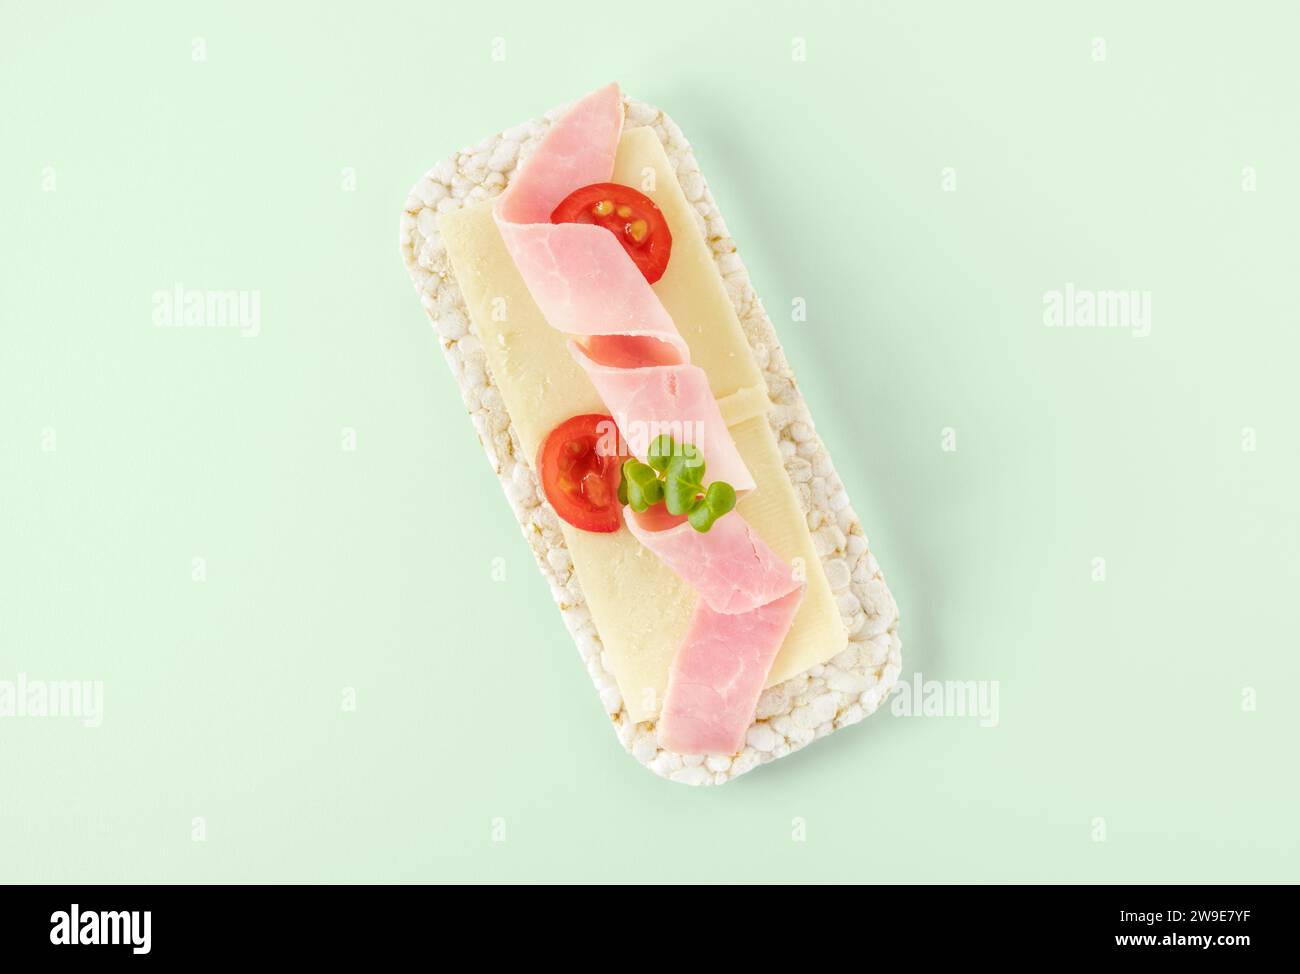 Oblong rice cake topped with ham and cheese Stock Photo